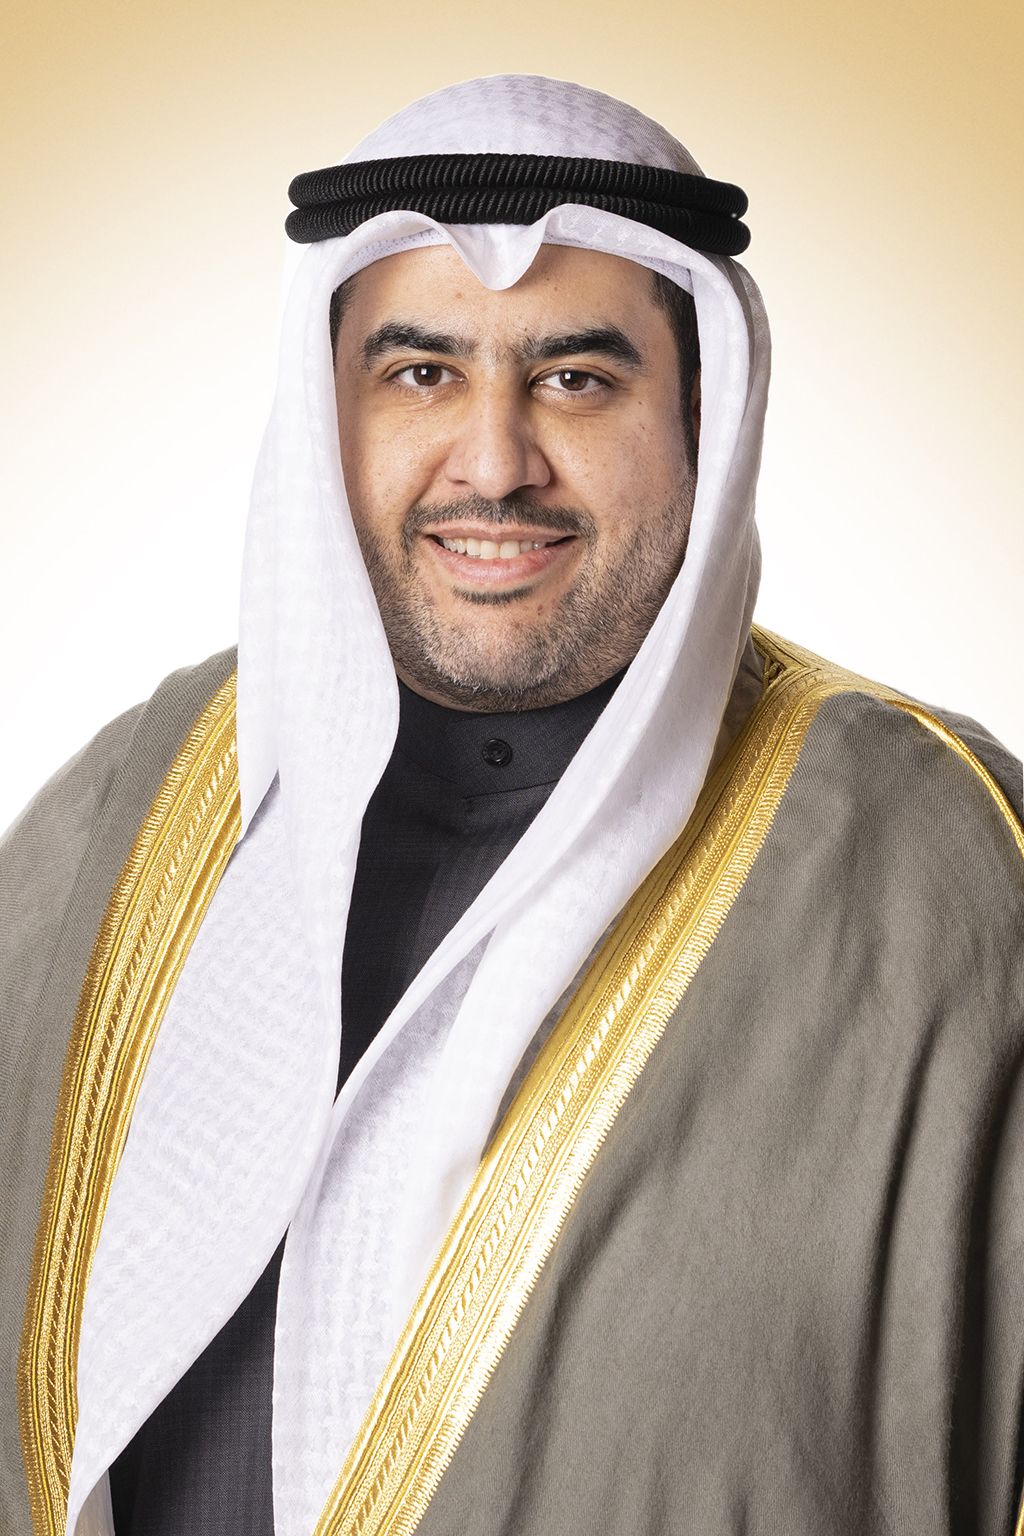 Abdulwahab Al-Rushaid, Minister of Finance and Minister of State for Economic Affairs and Investment.